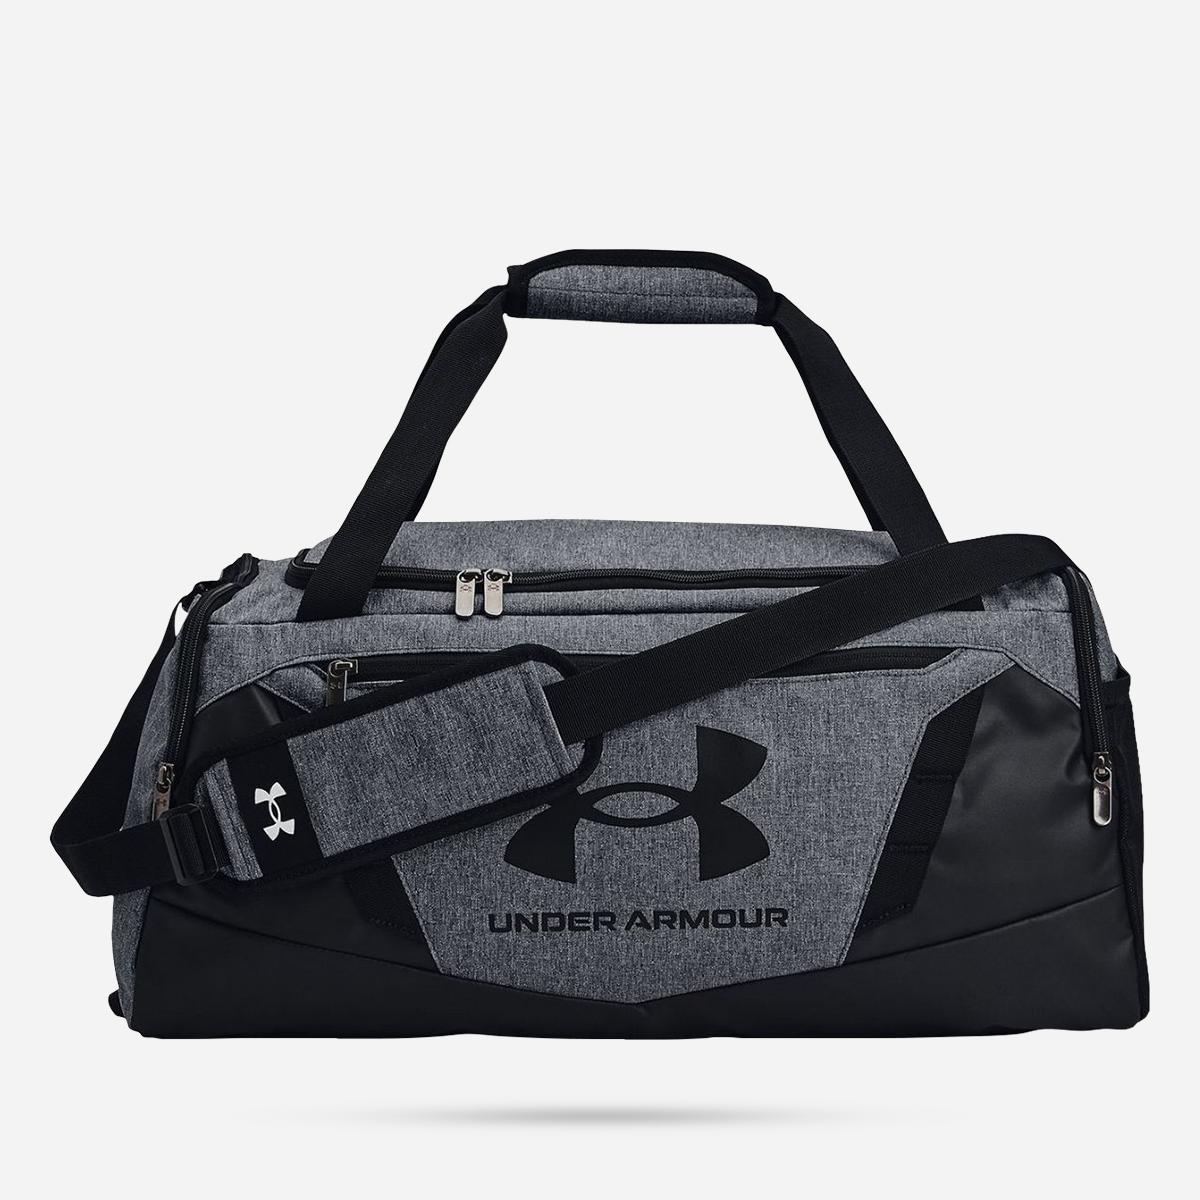 AN288083 Undeniable 5.0 Duffle MD